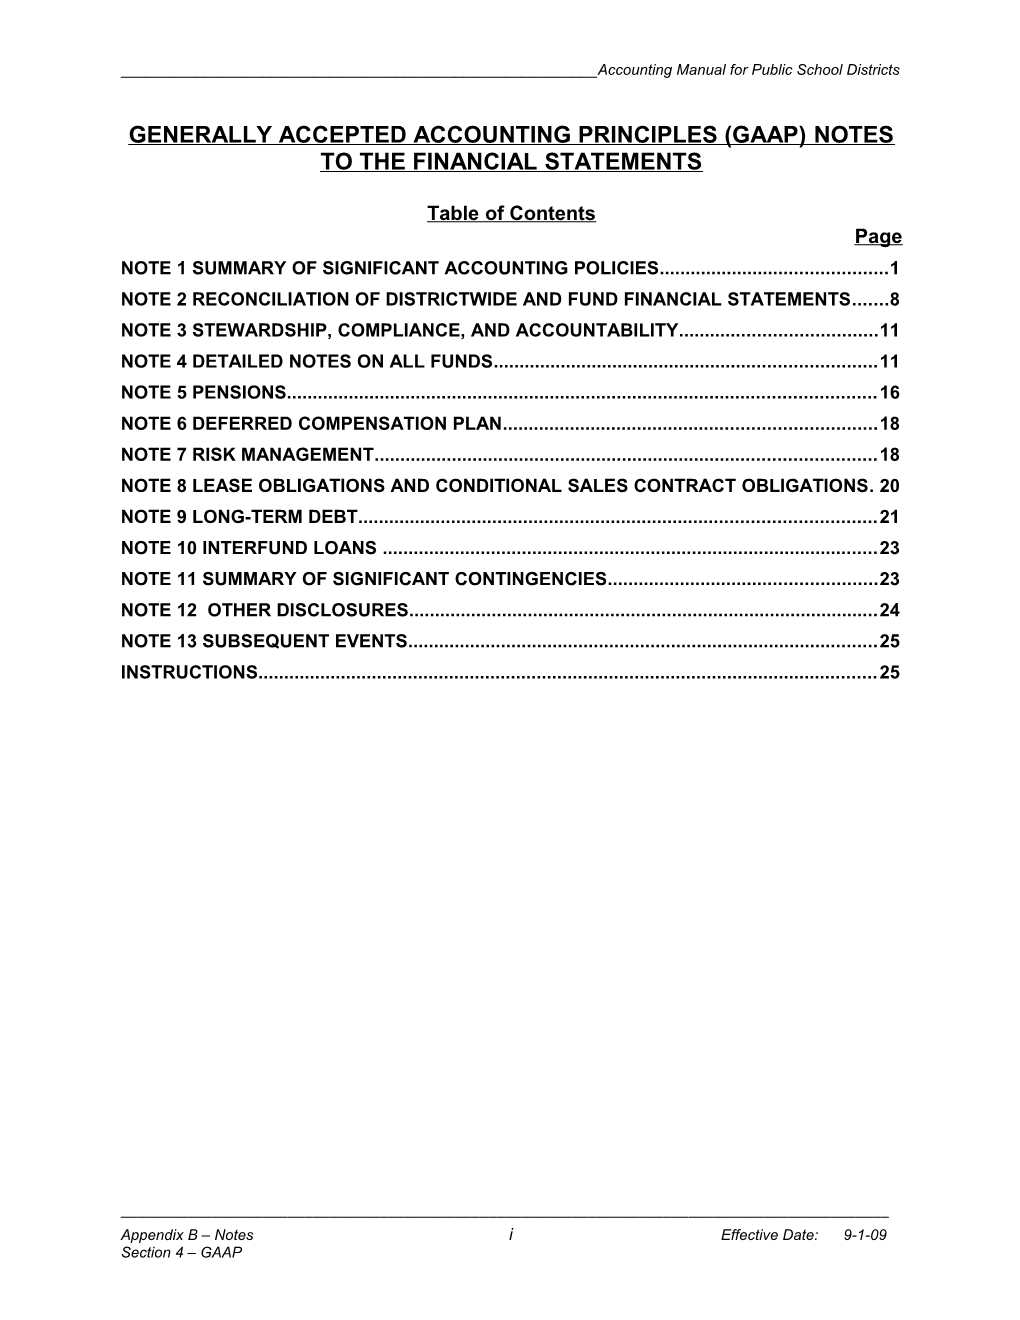 Generally Accepted Accounting Principles (Gaap ) Notes to the Financial Statements